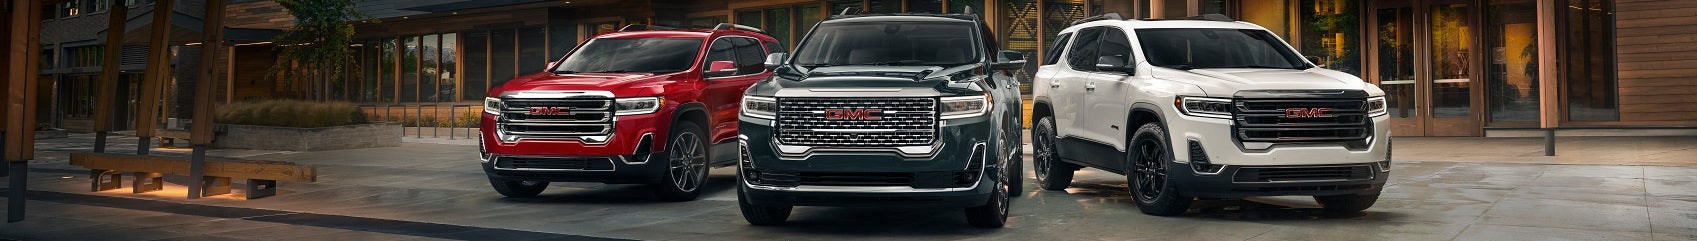 How to Lease a GMC